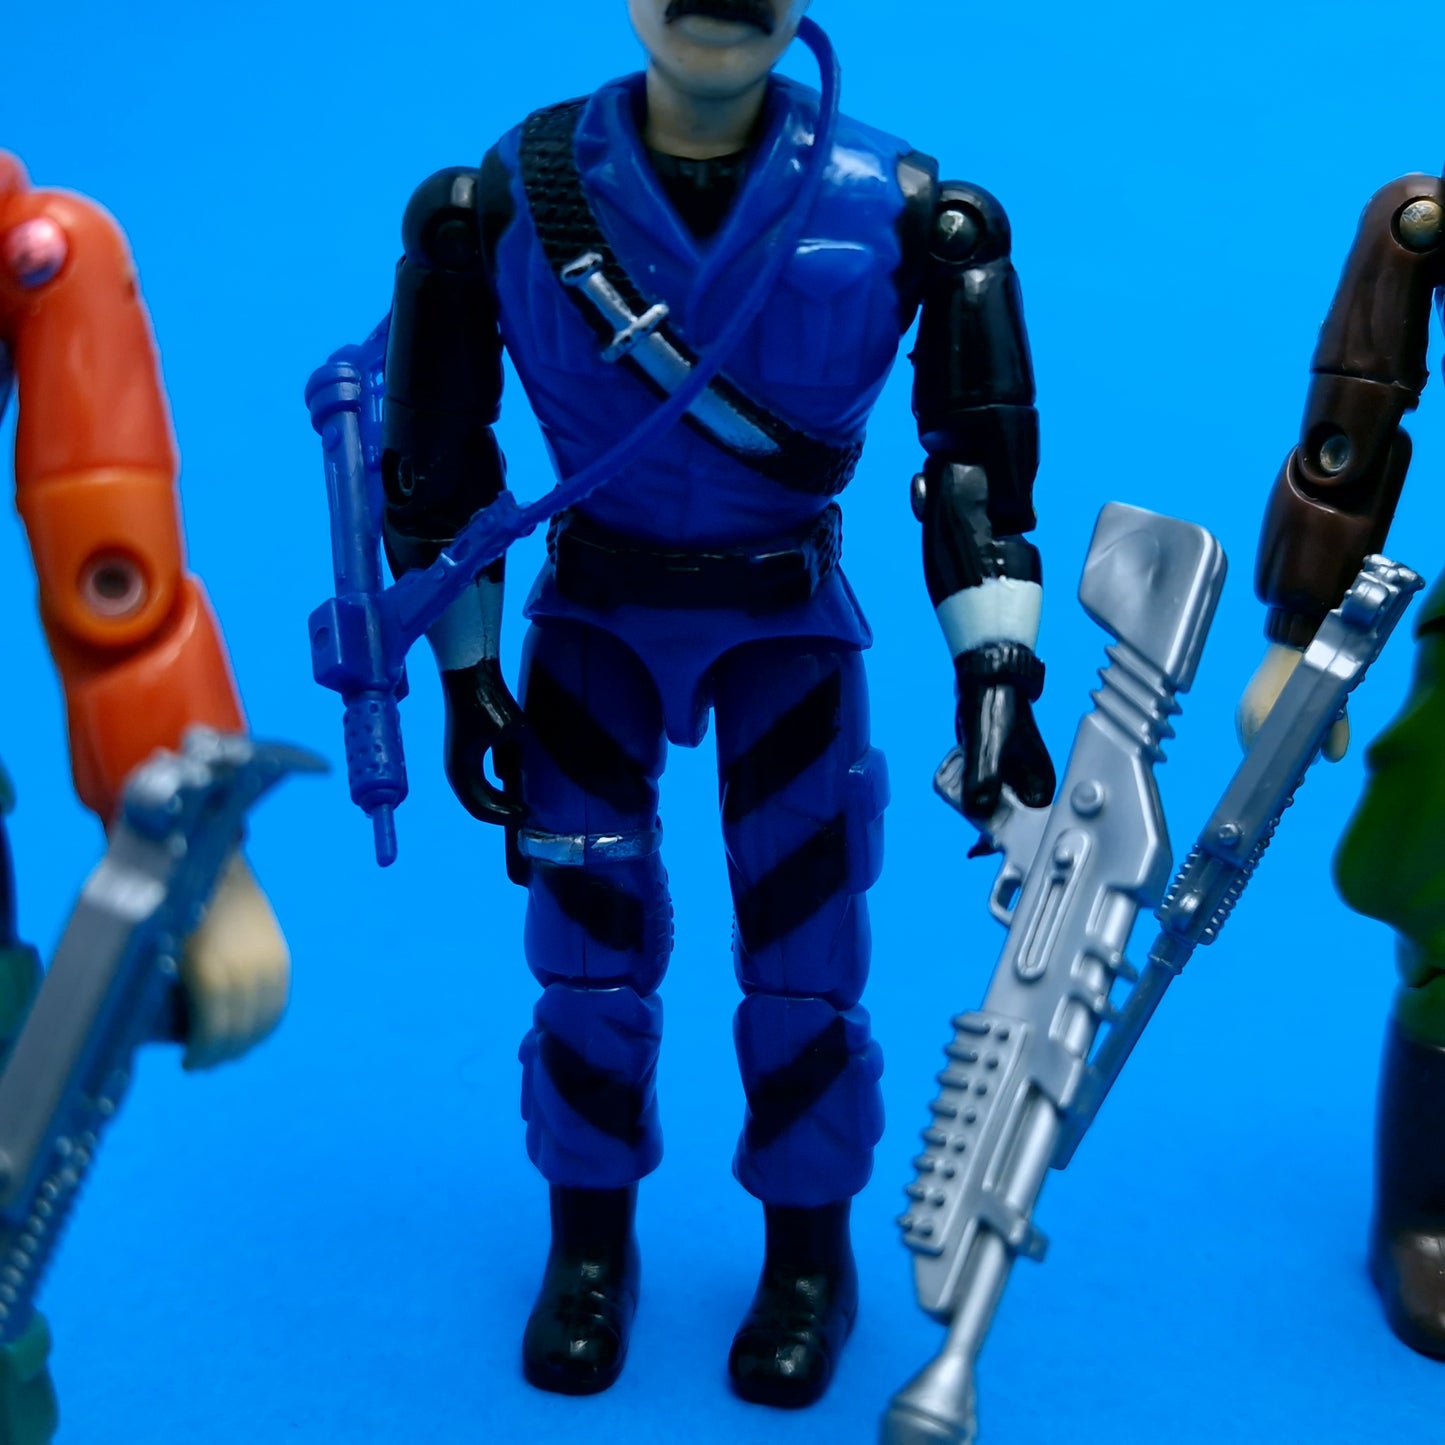 THE CORPS ☆ Bundle of 7 Action Figures with accessories ☆ Vintage Action Force Lanard  gi joe style